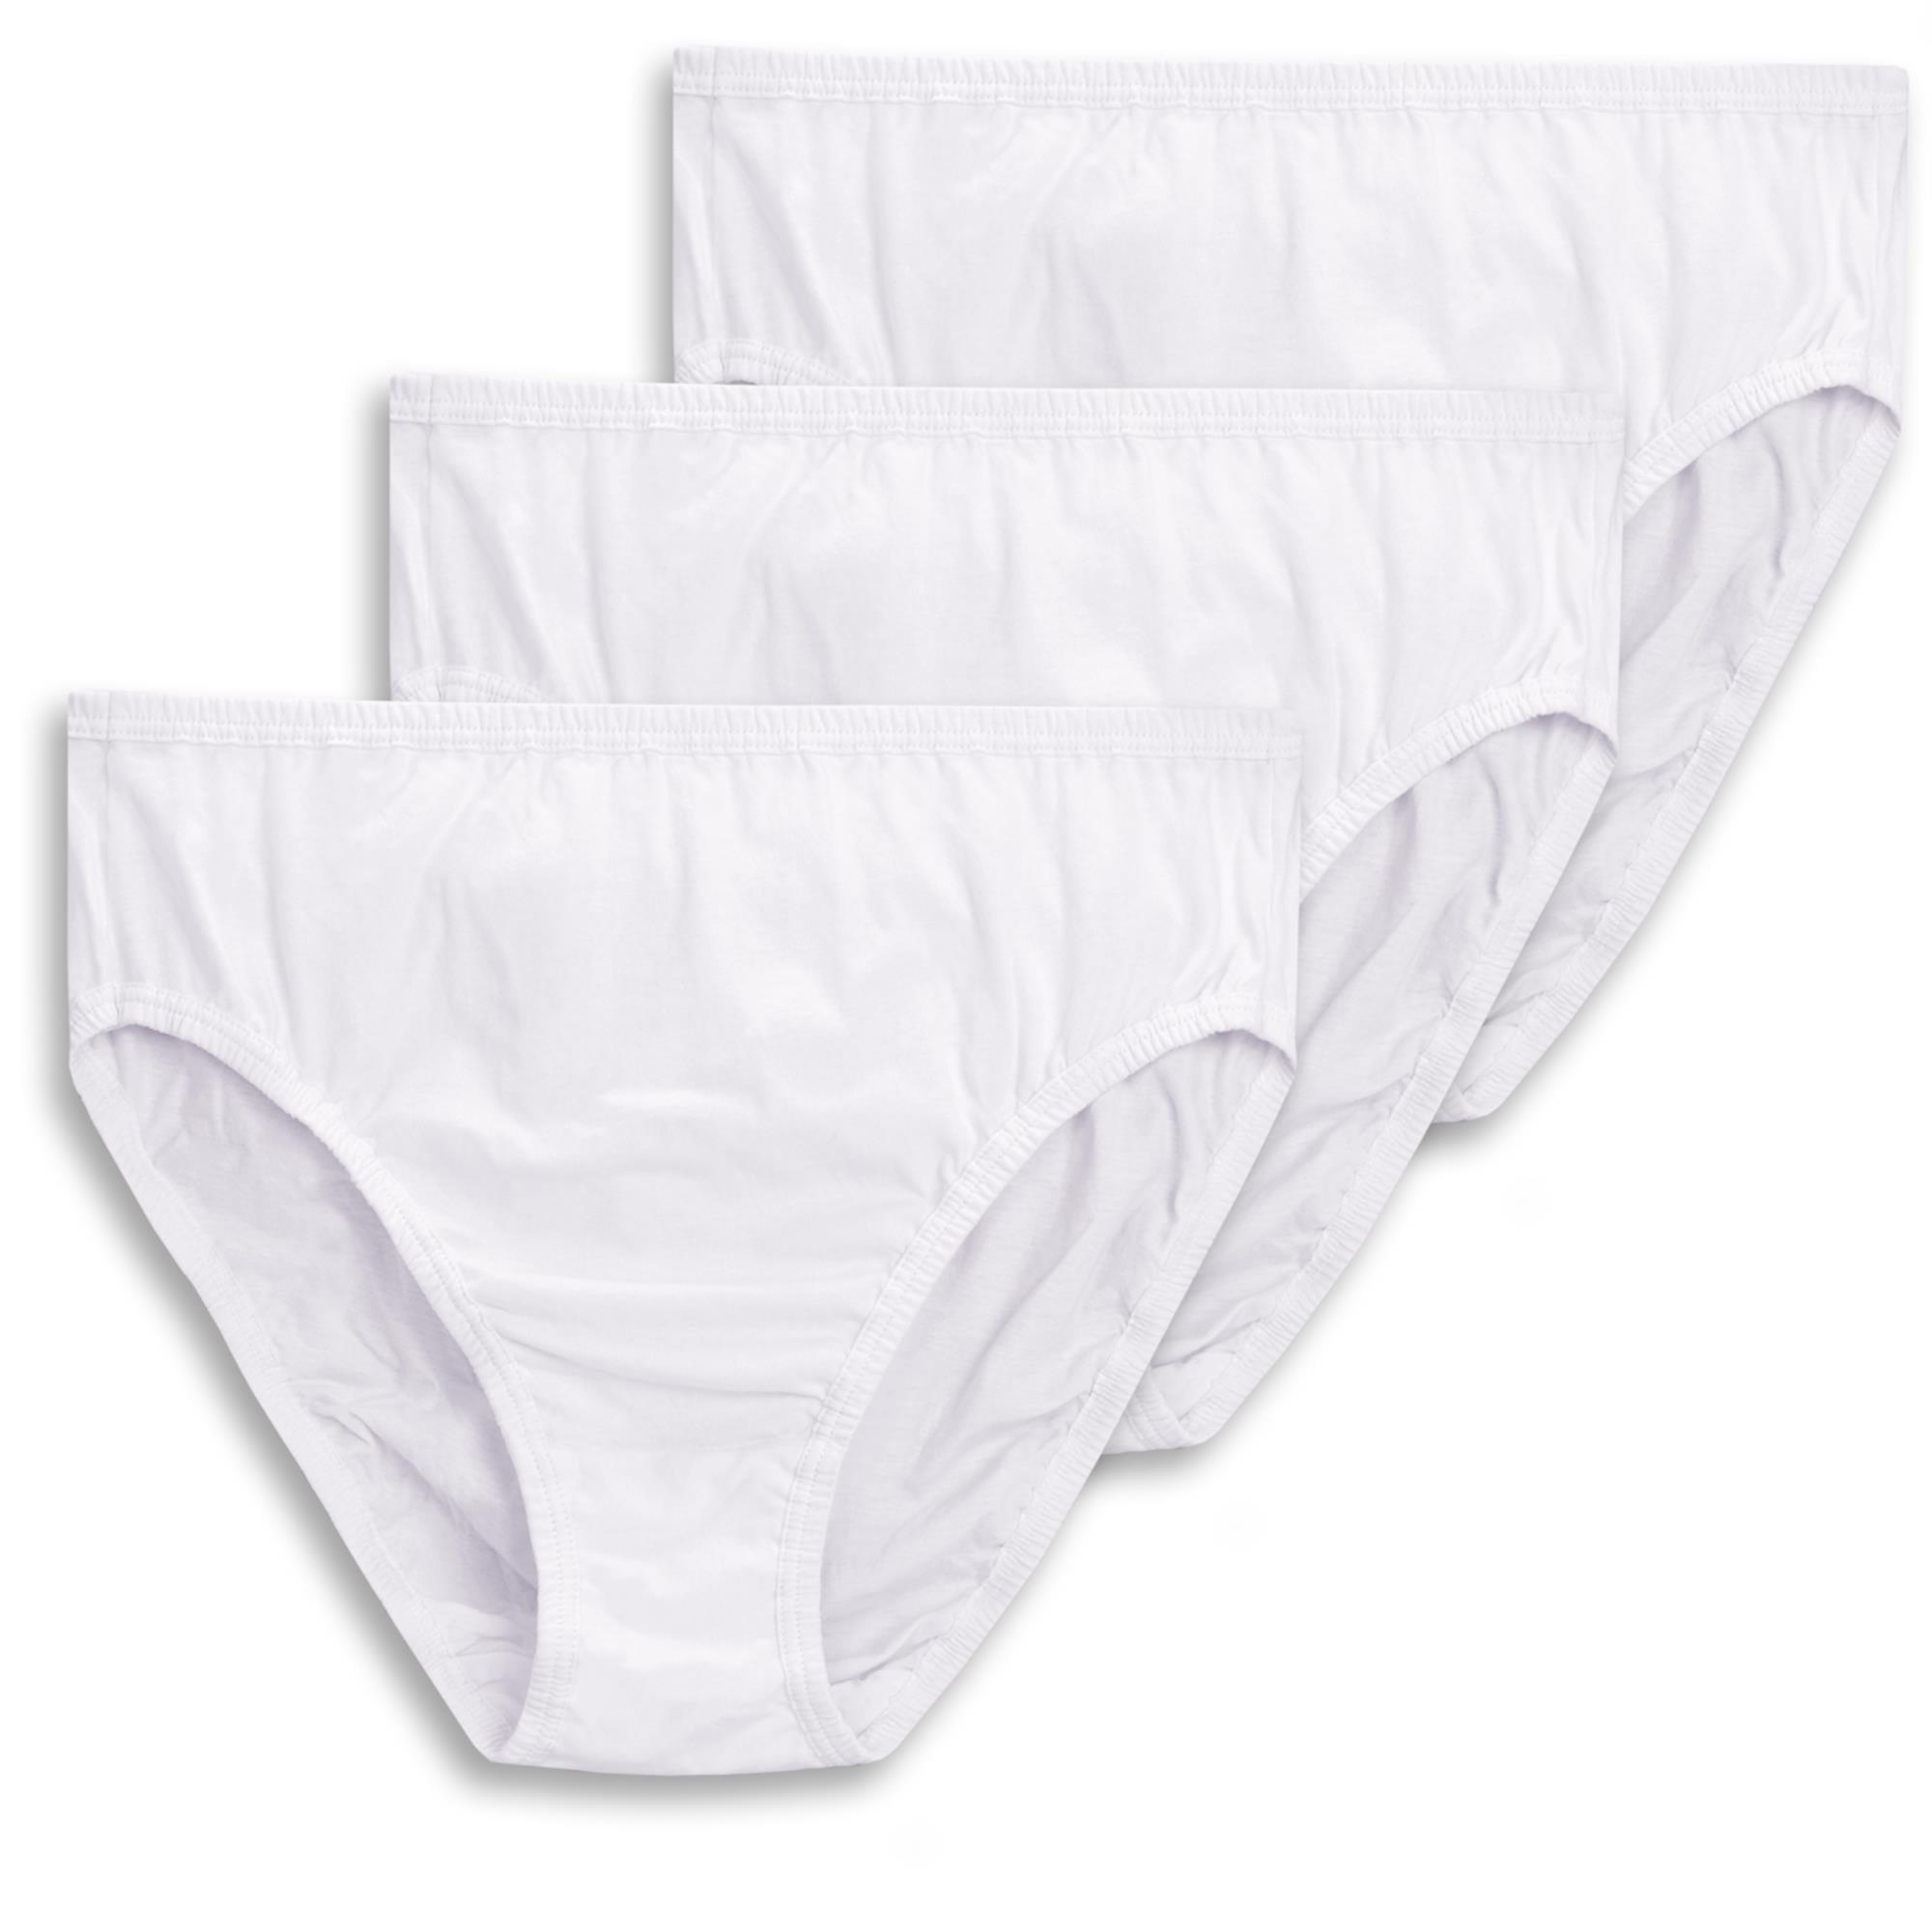 Plus Size Soft Cotton High Waisted Cheeky Panties For Women Love 3 Pack  High Cut Briefs In Solid Colors From Dou04, $20.4